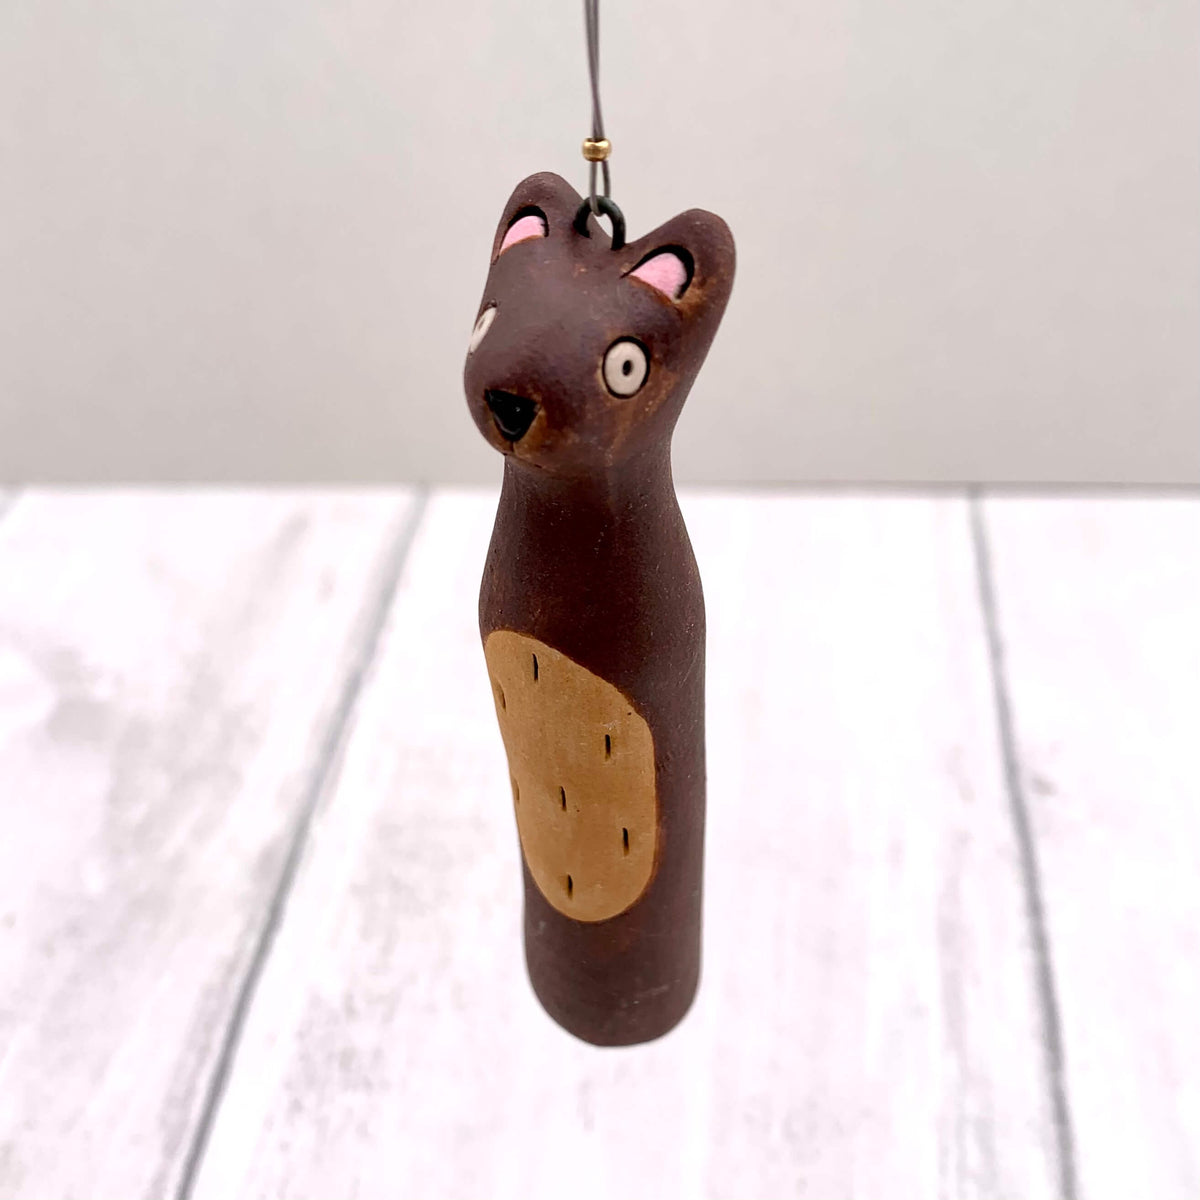 Handmade ceramic hanging of a brown bear, with a tan belly and tiny gold bead.